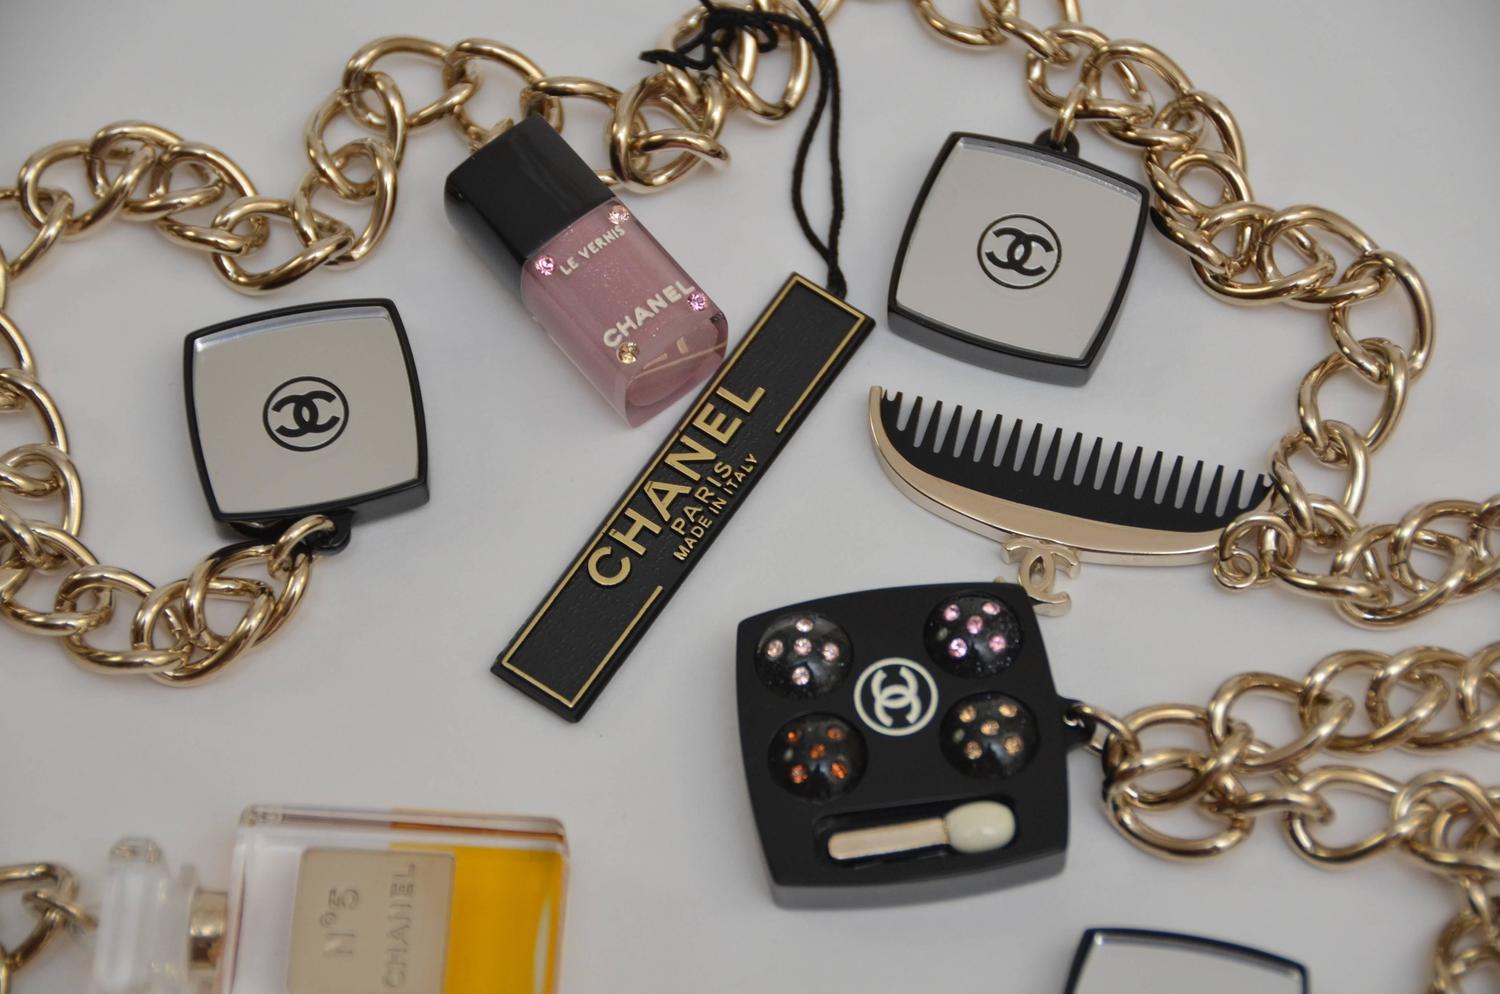 Rare CHANEL Makeup Charm Necklace 2008 NEW For Sale at 1stdibs